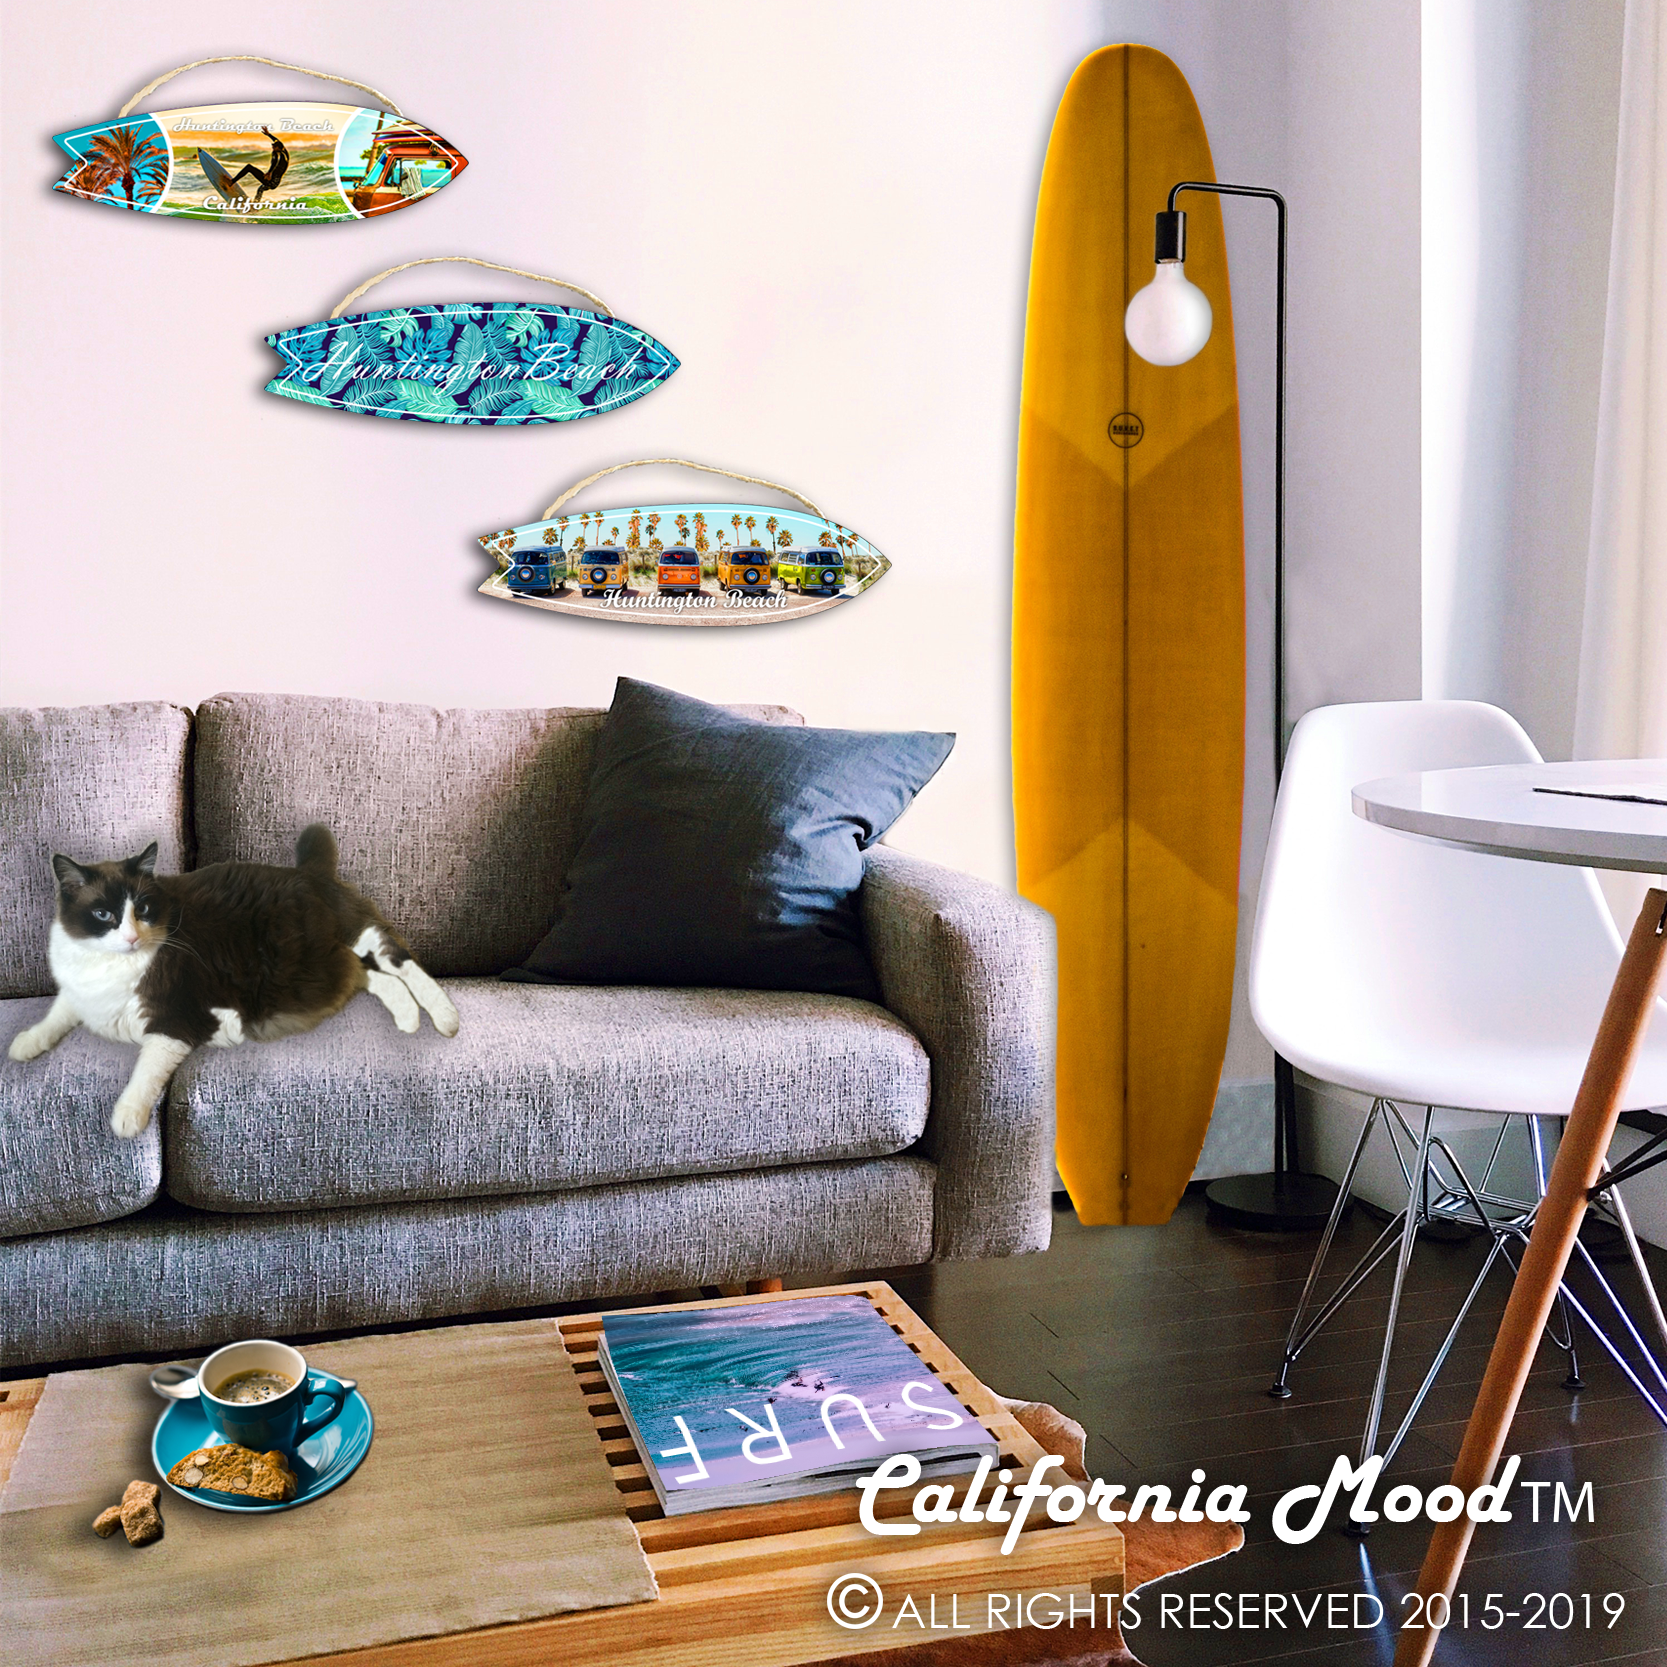 HUNTINGTON BEACH, WOOD SURFBOARD WALL HANGINGS, MAGNETS AND KEY-CHAINS  PRICED FROM